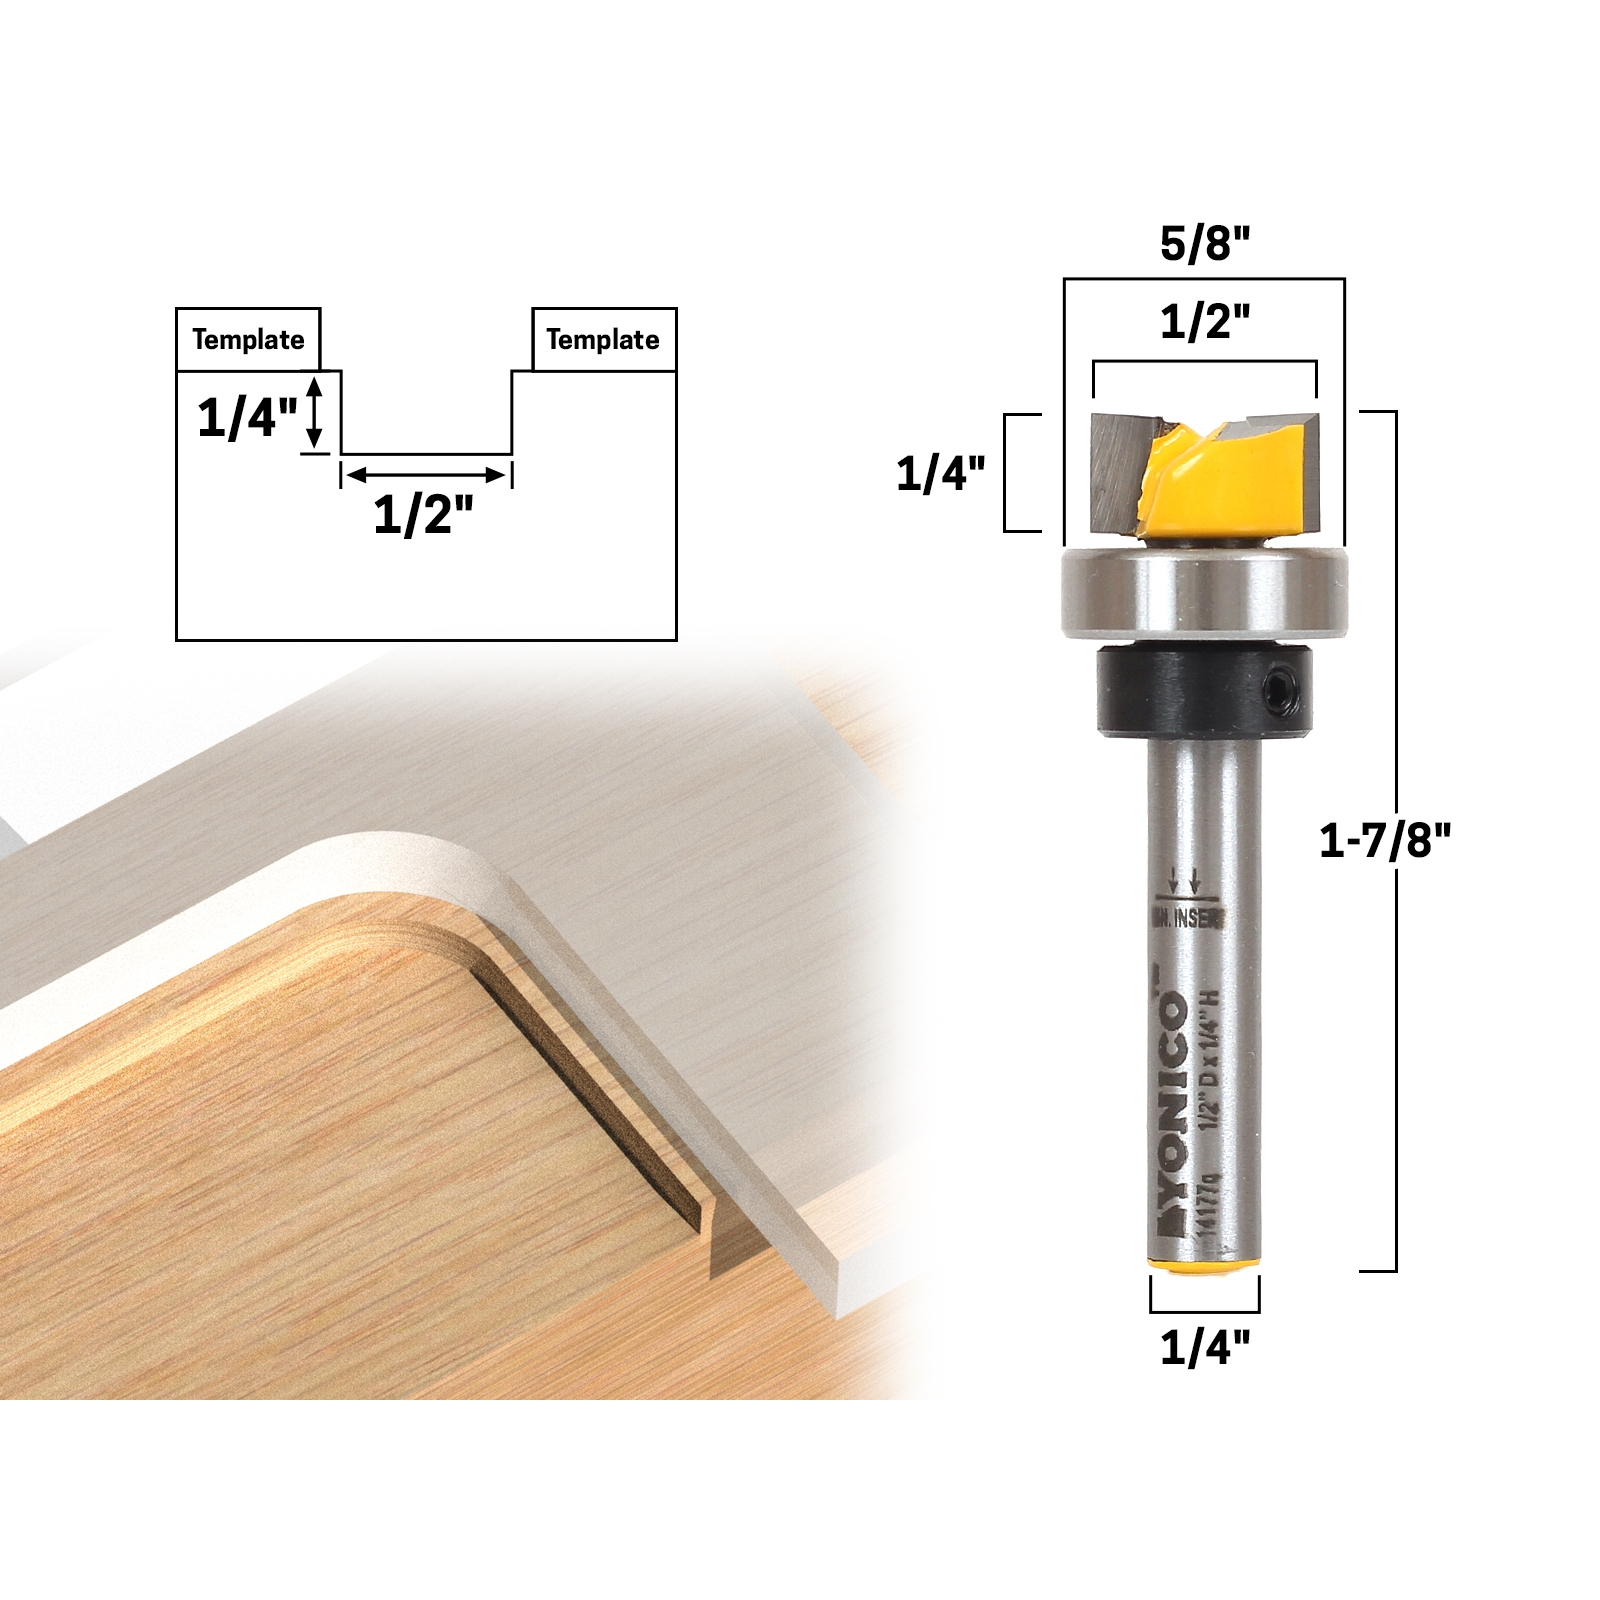 straight-spiral-template-trim-hinge-mortise-template-router-bit